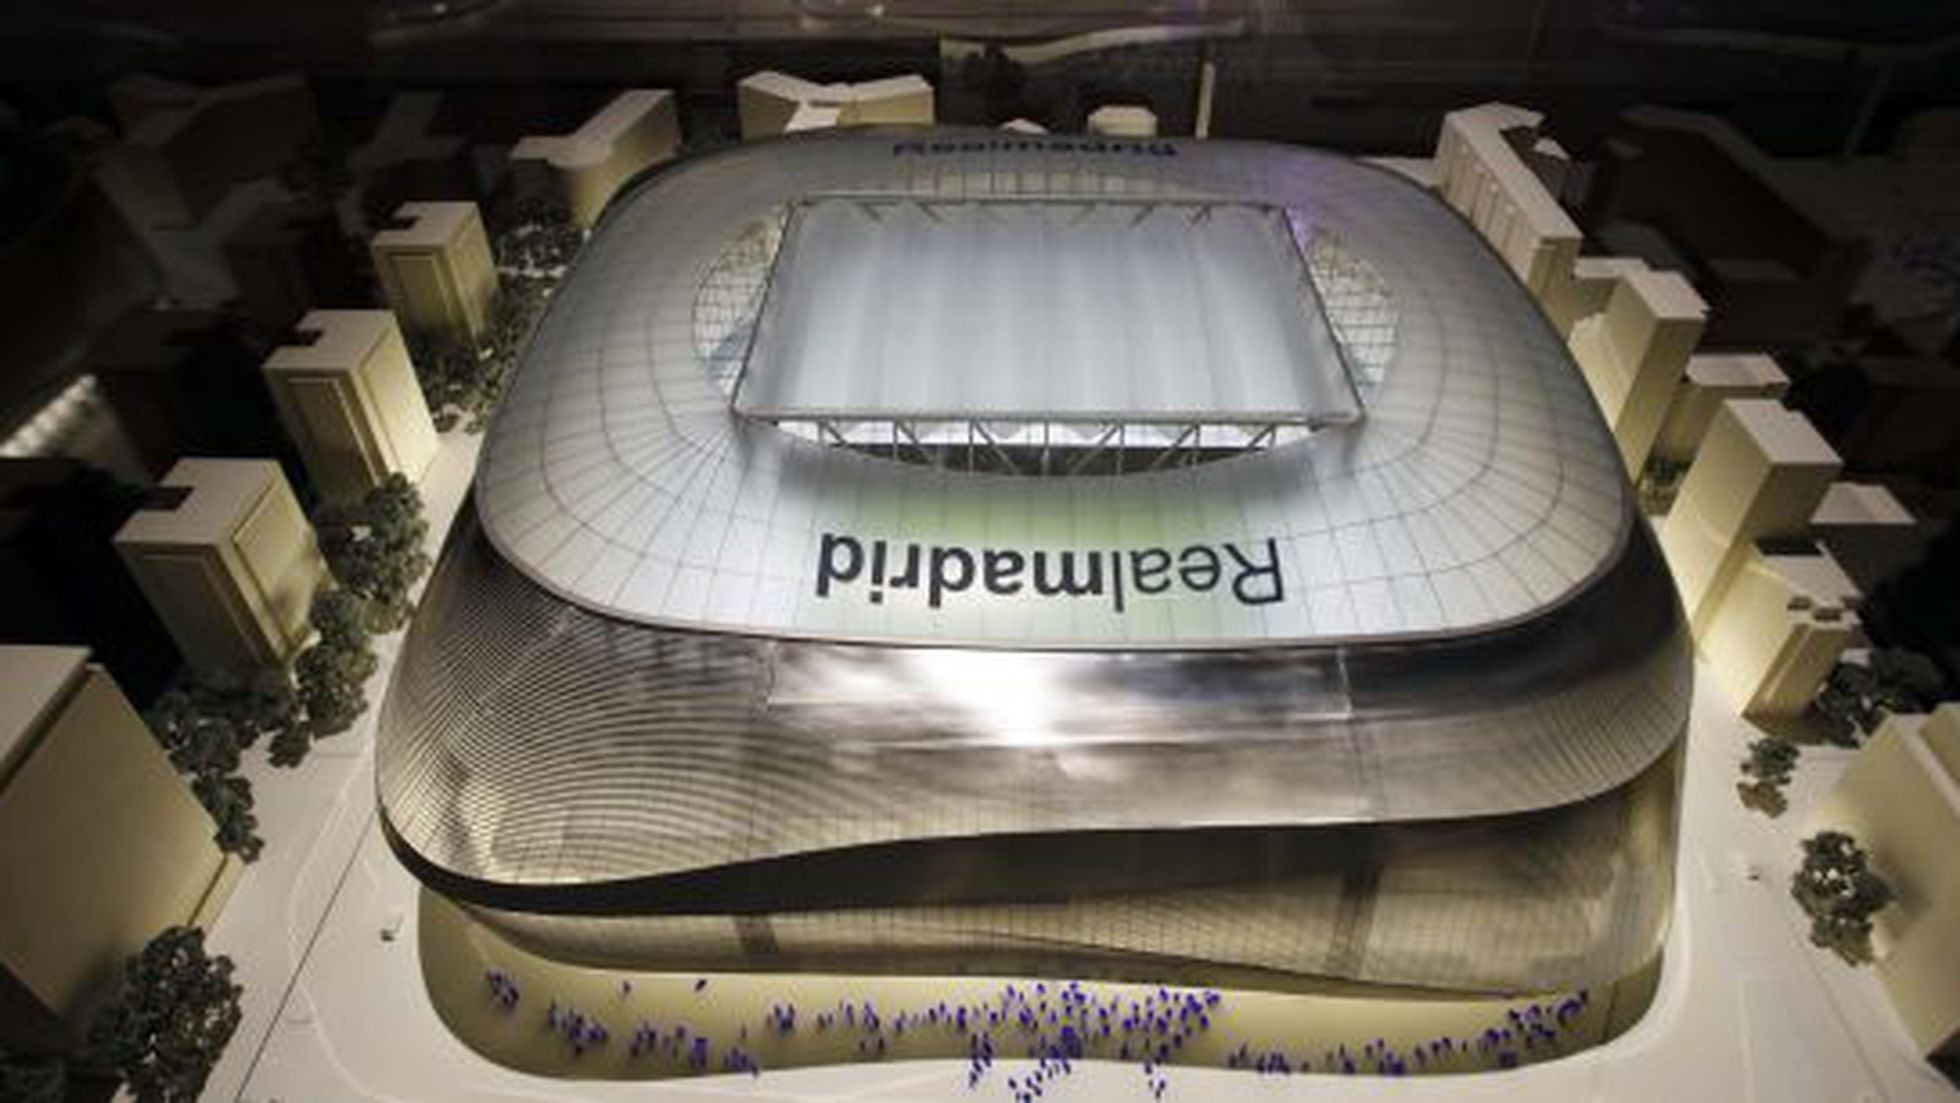 Santiago Bernabeu Stadium - All You Need to Know BEFORE You Go (with Photos)